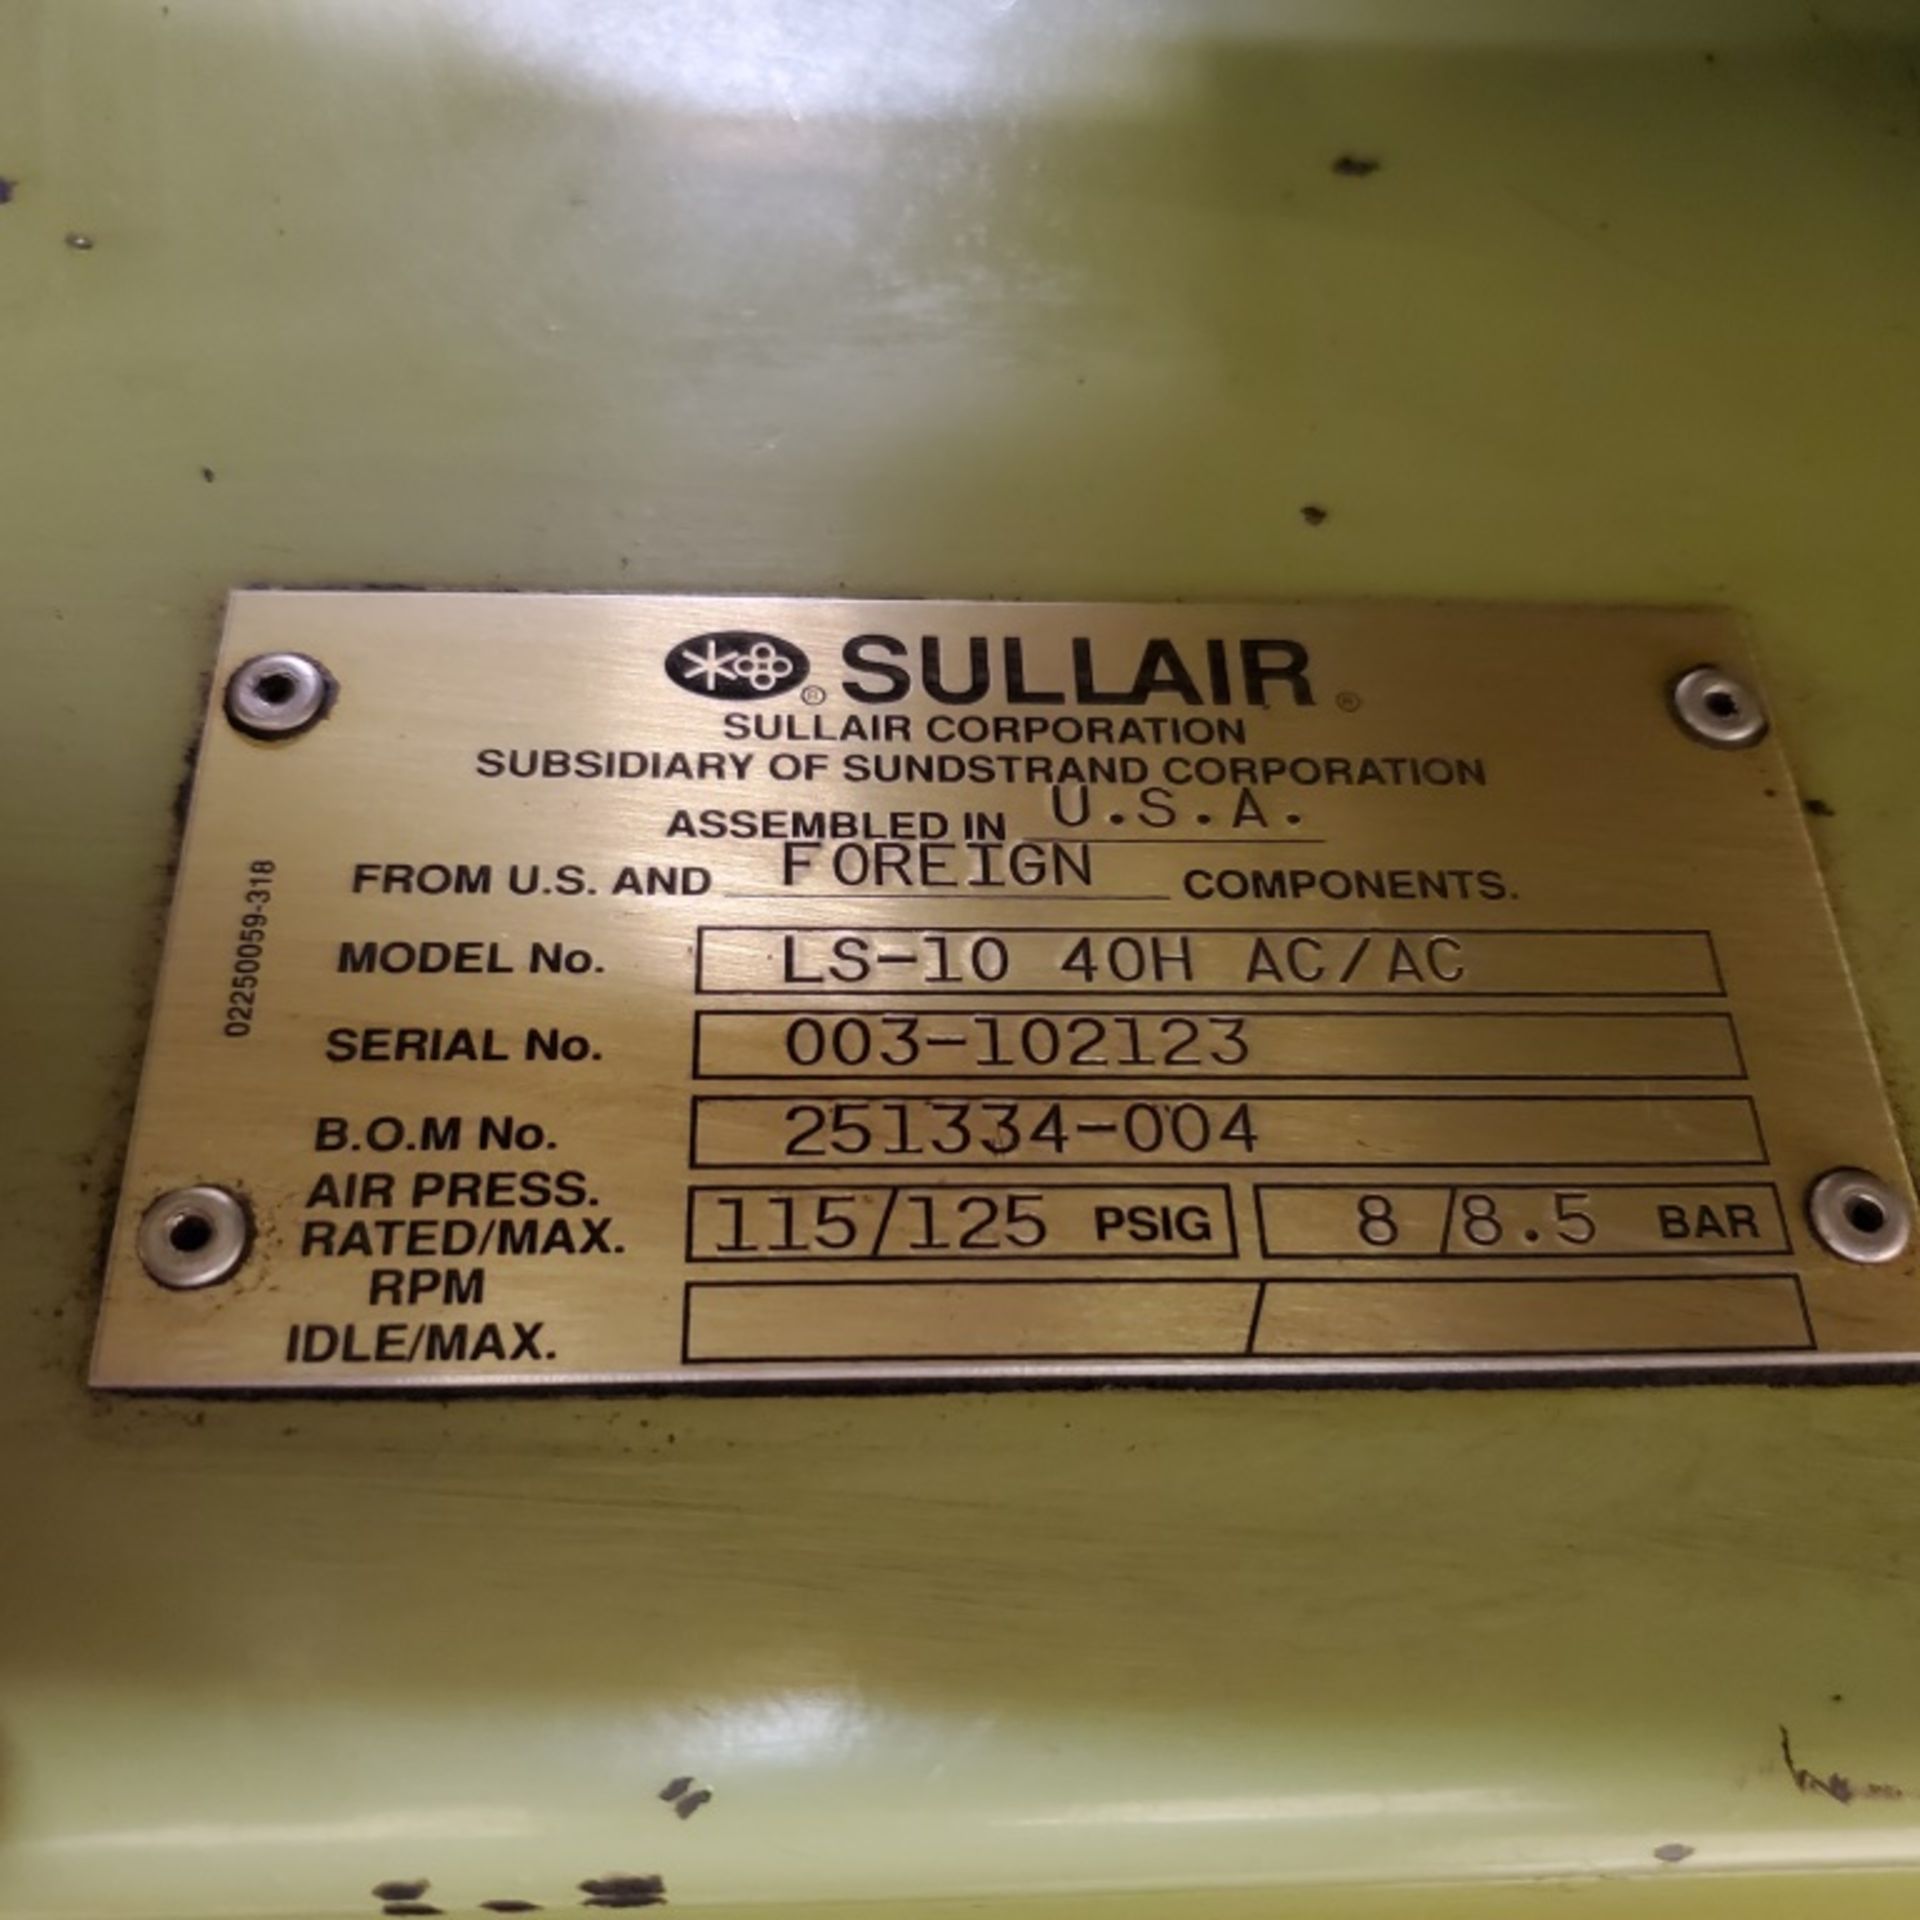 Sullair LS-10 Rotary Screw Air Compressor 40HP, 150 Gallon Tank, 2322 Hours, 230v, 3 PH, Loading Fee - Image 3 of 9